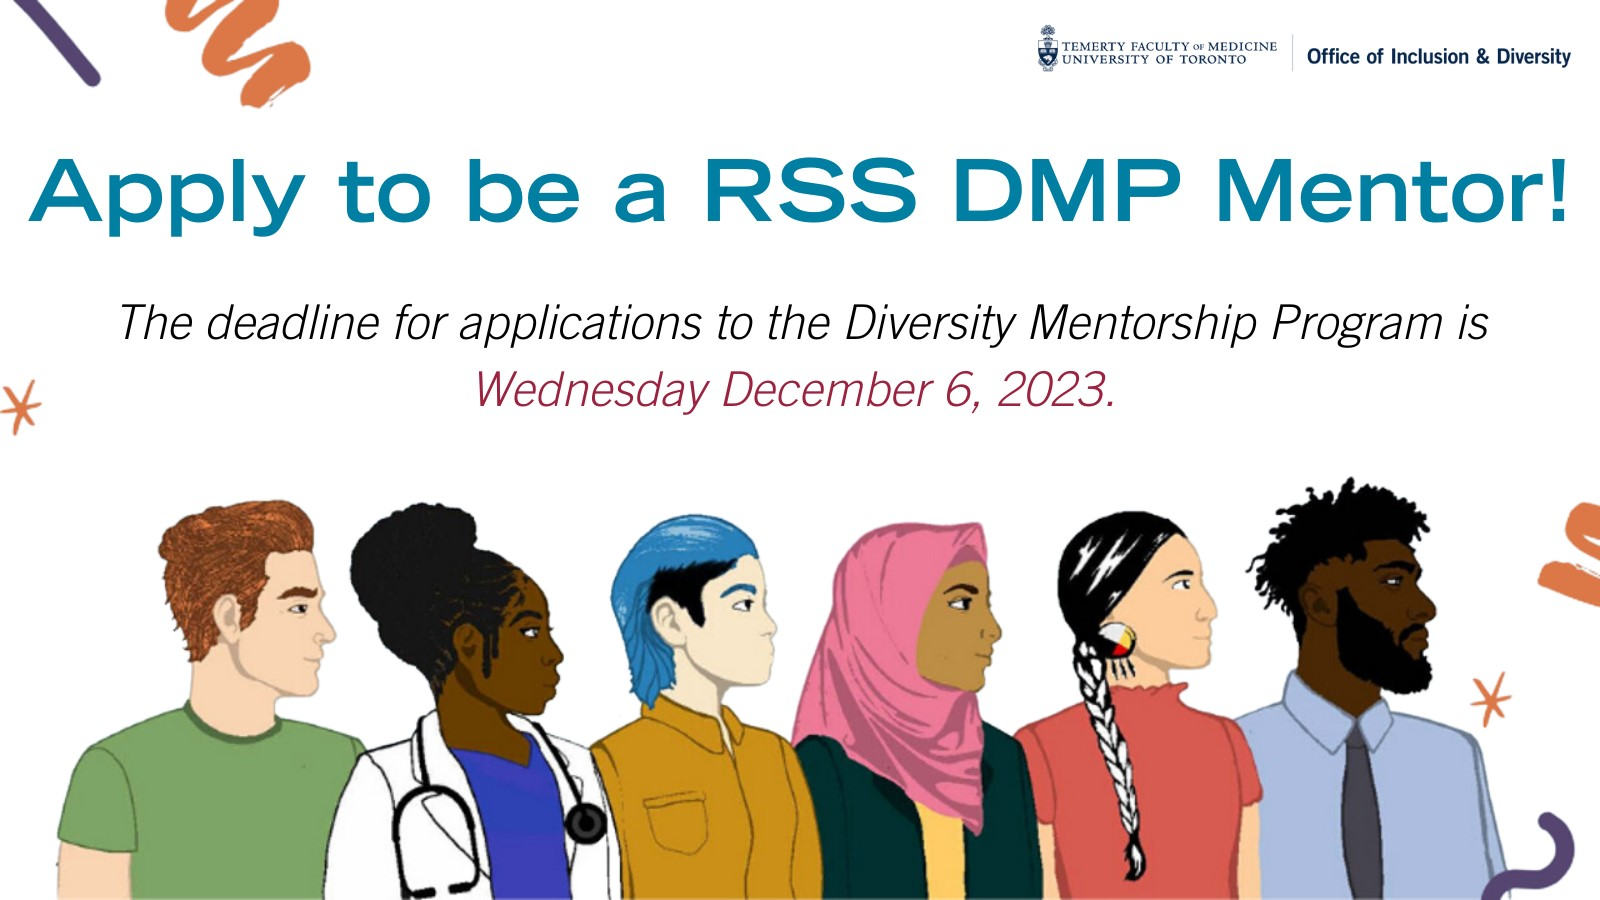 Image of several students with the tagline "Apply to be a RSS DMP Mentor"